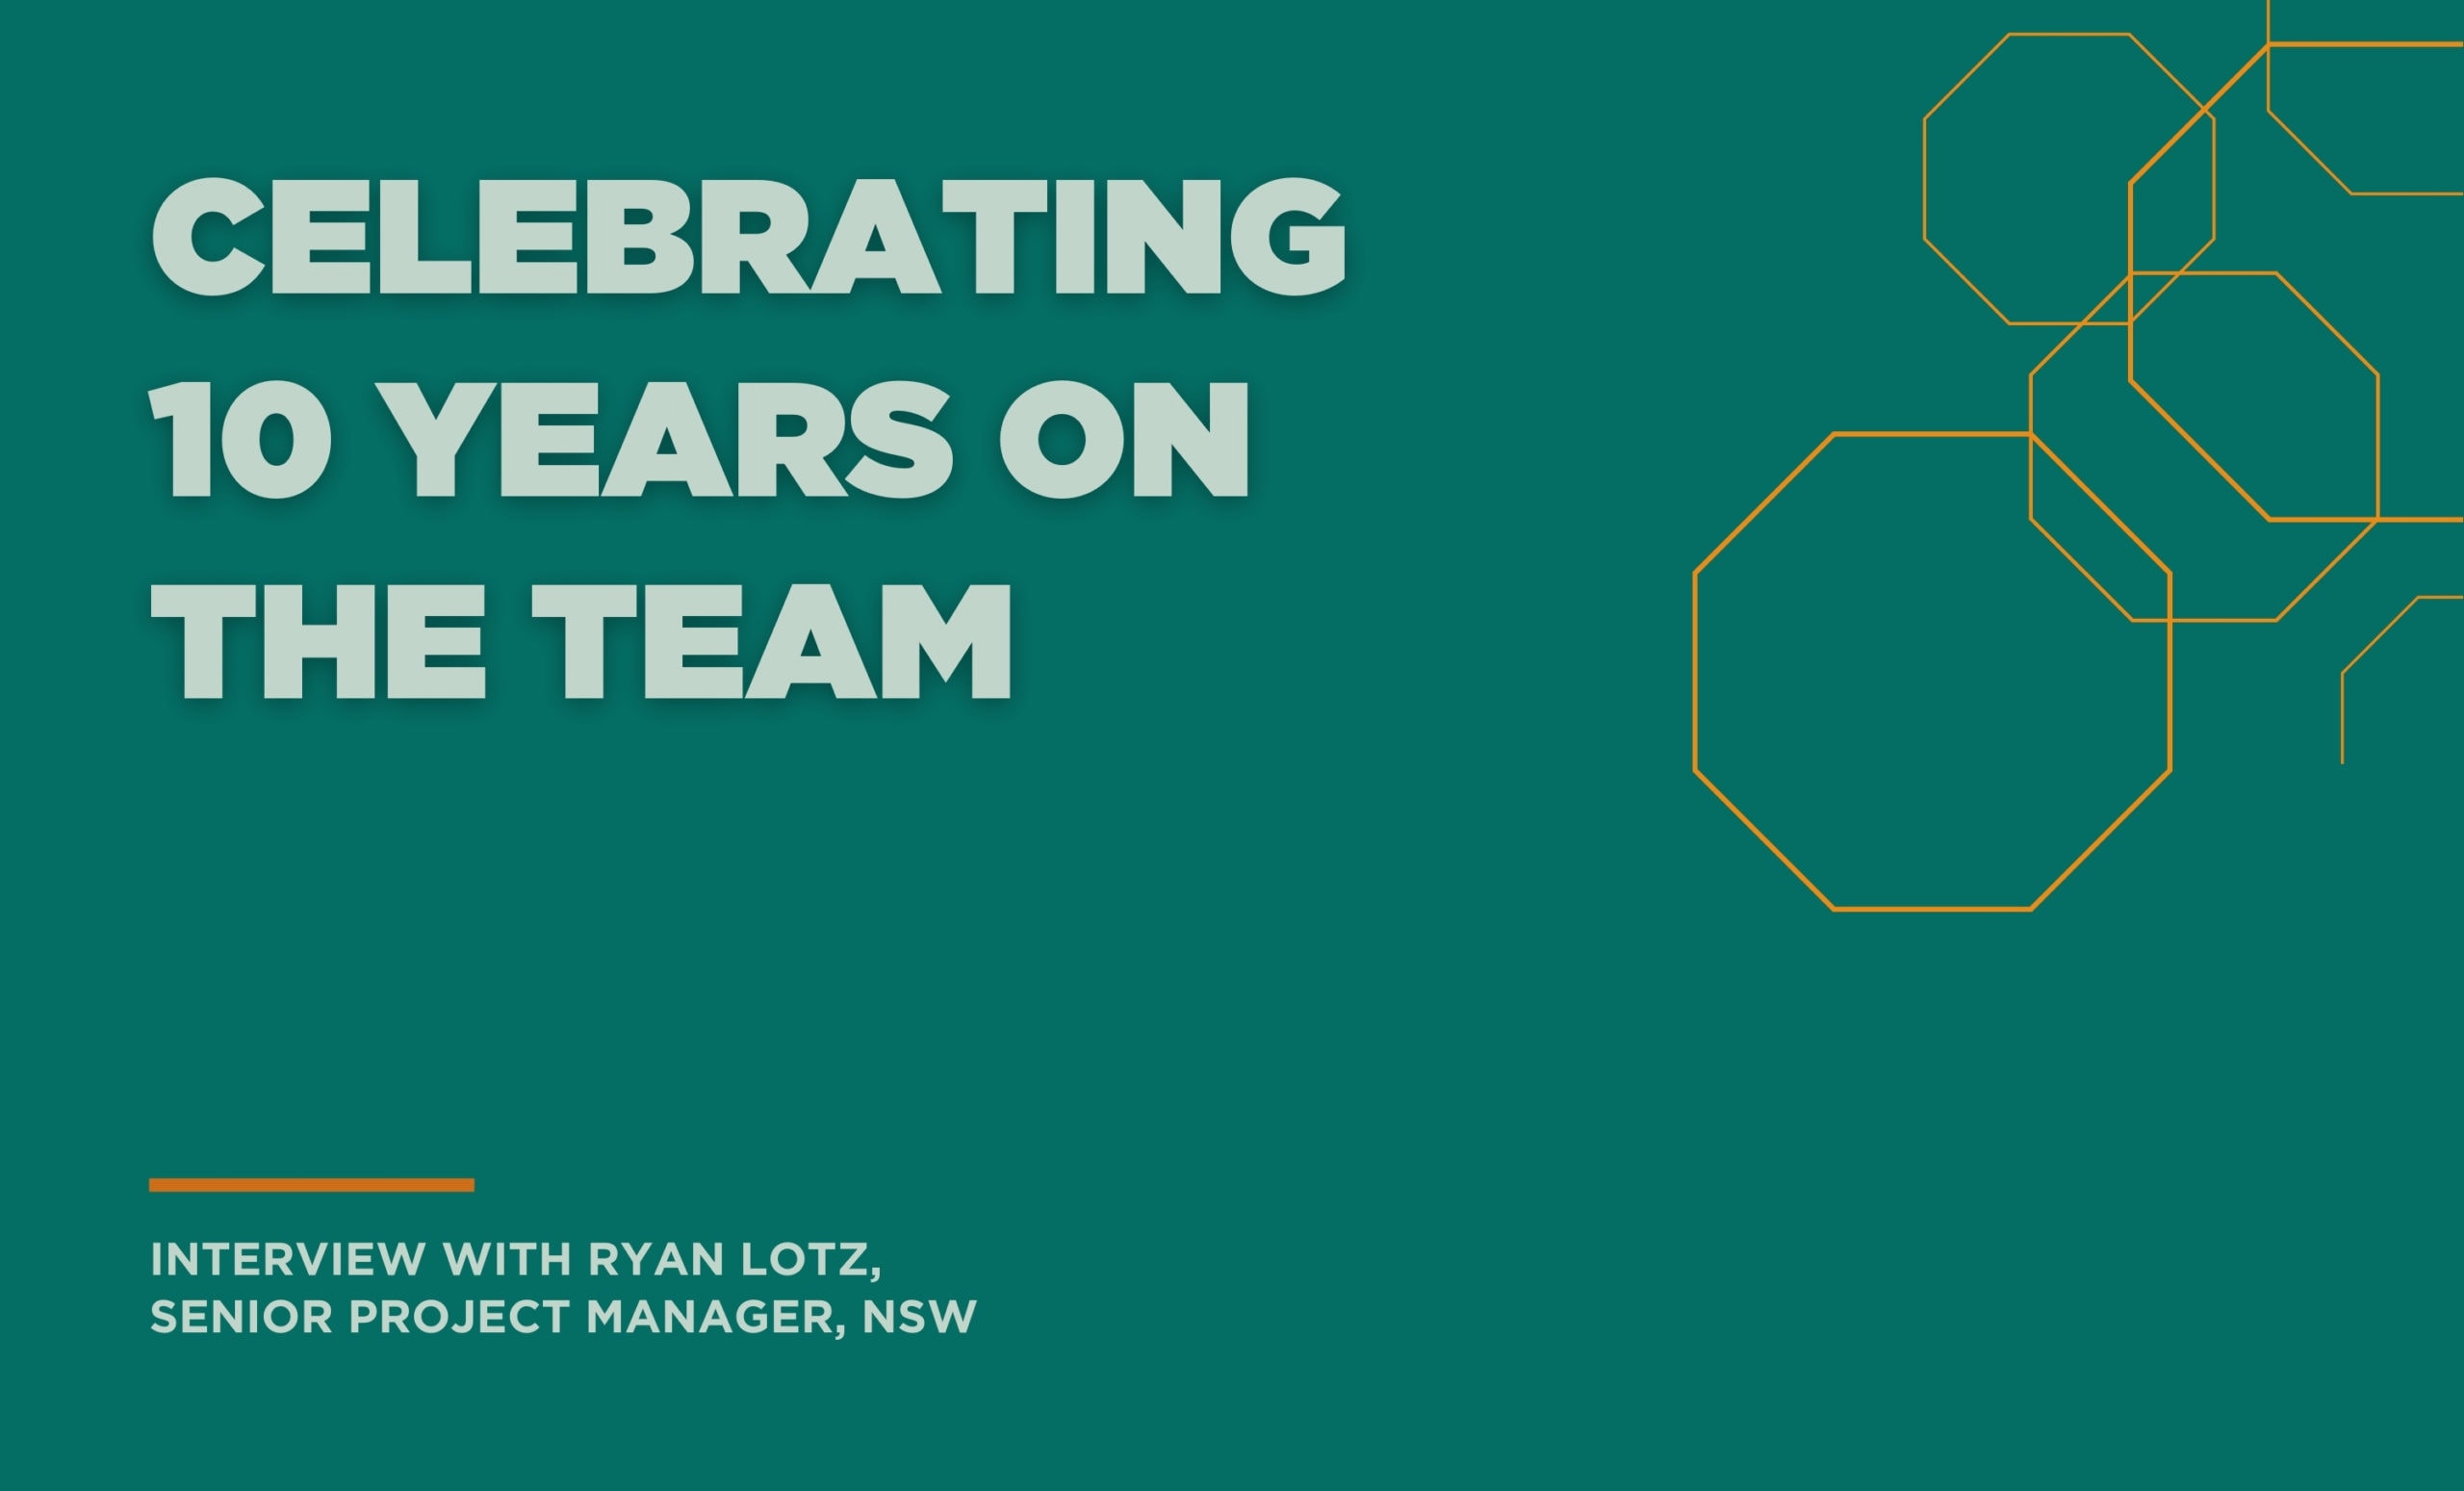 Celebrating 10 years on the team